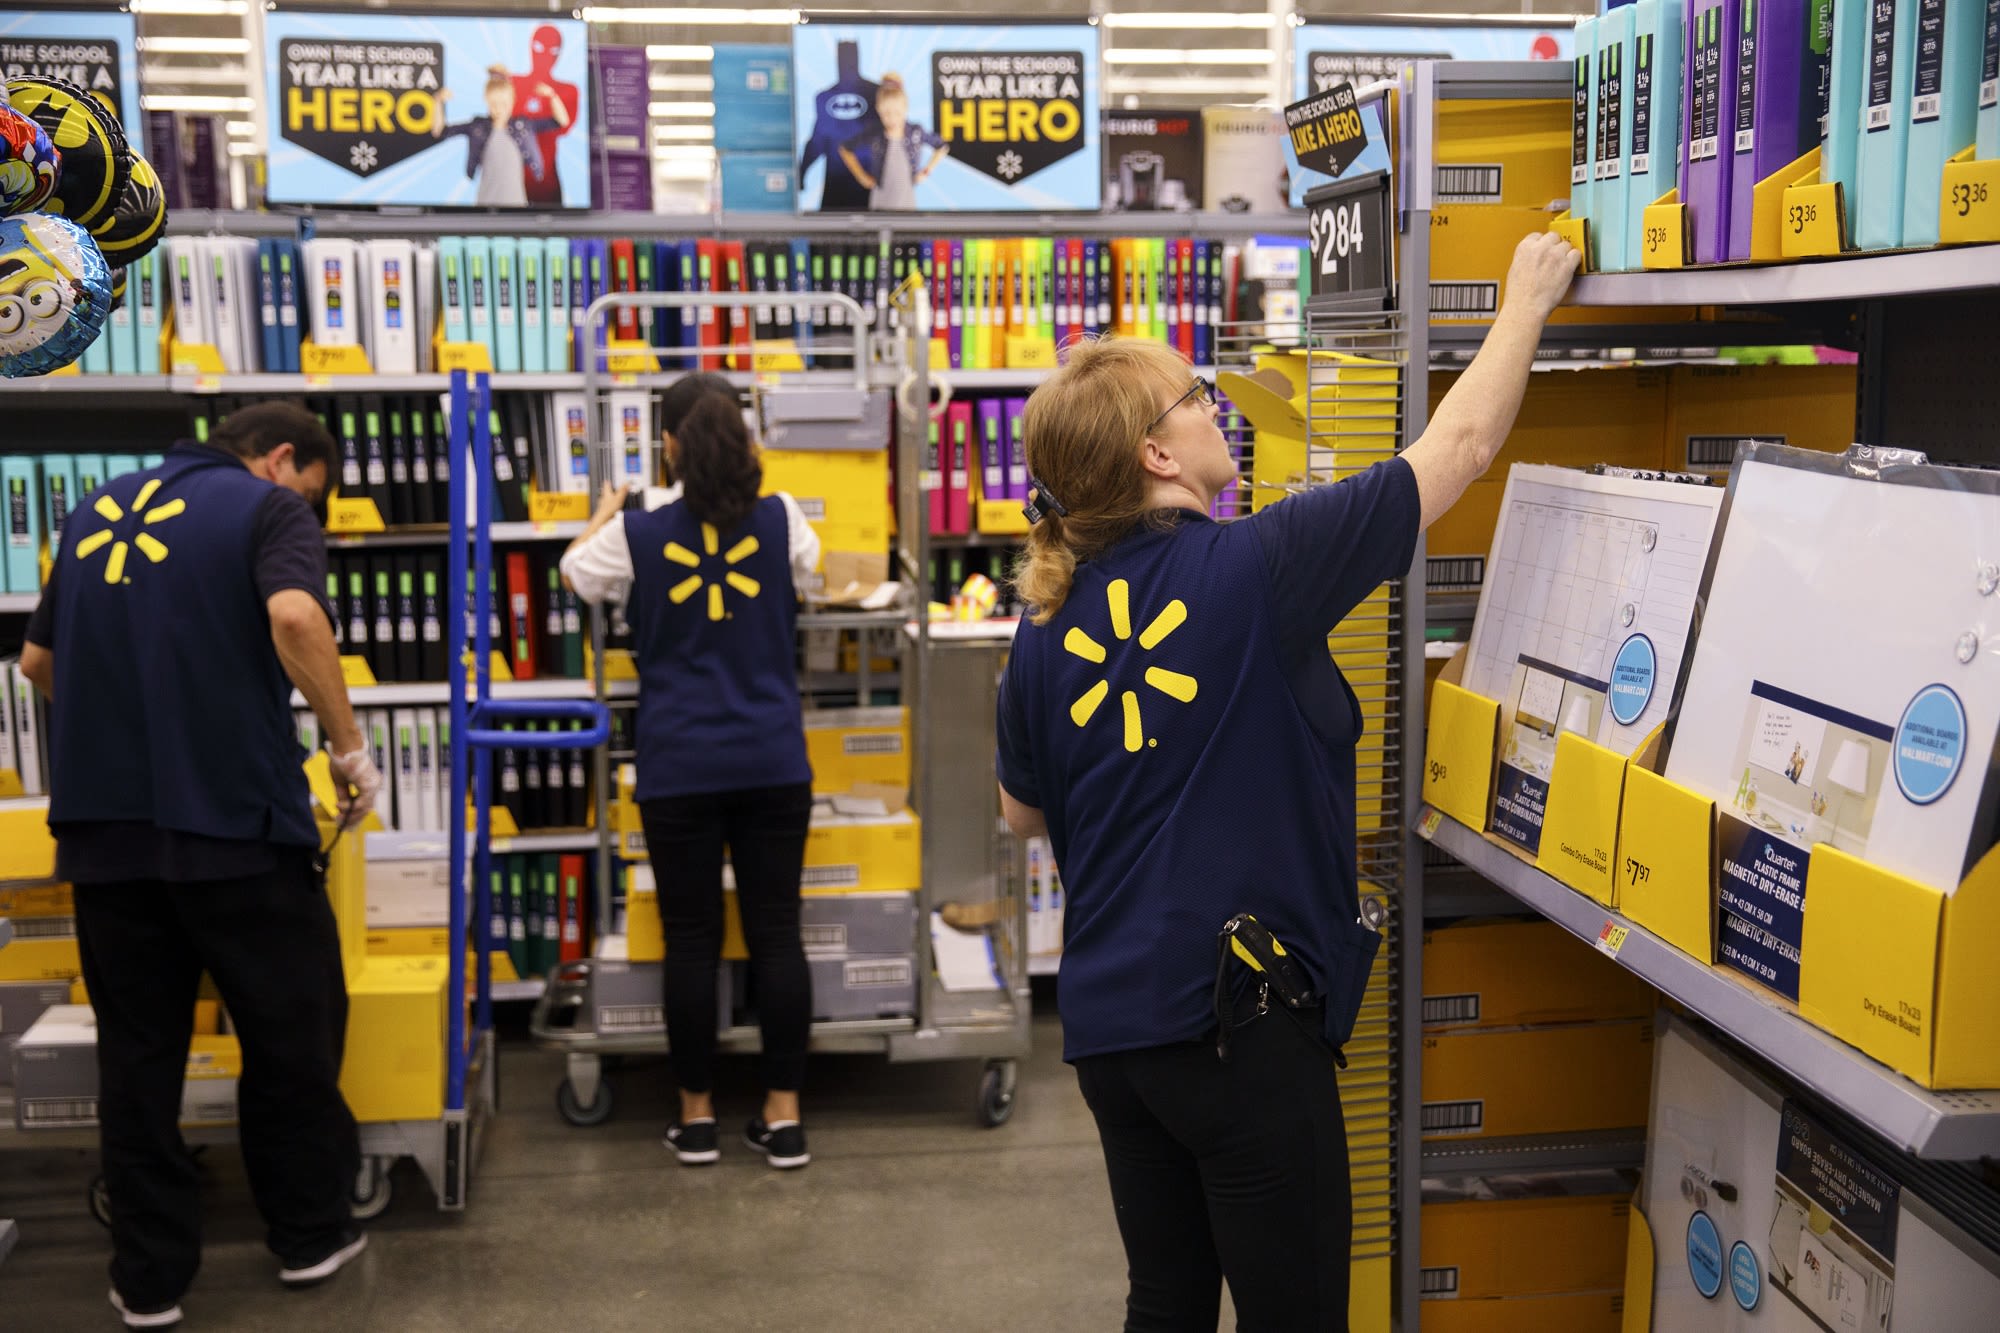 Walmart will save $30 million by putting new step stools in warehouses